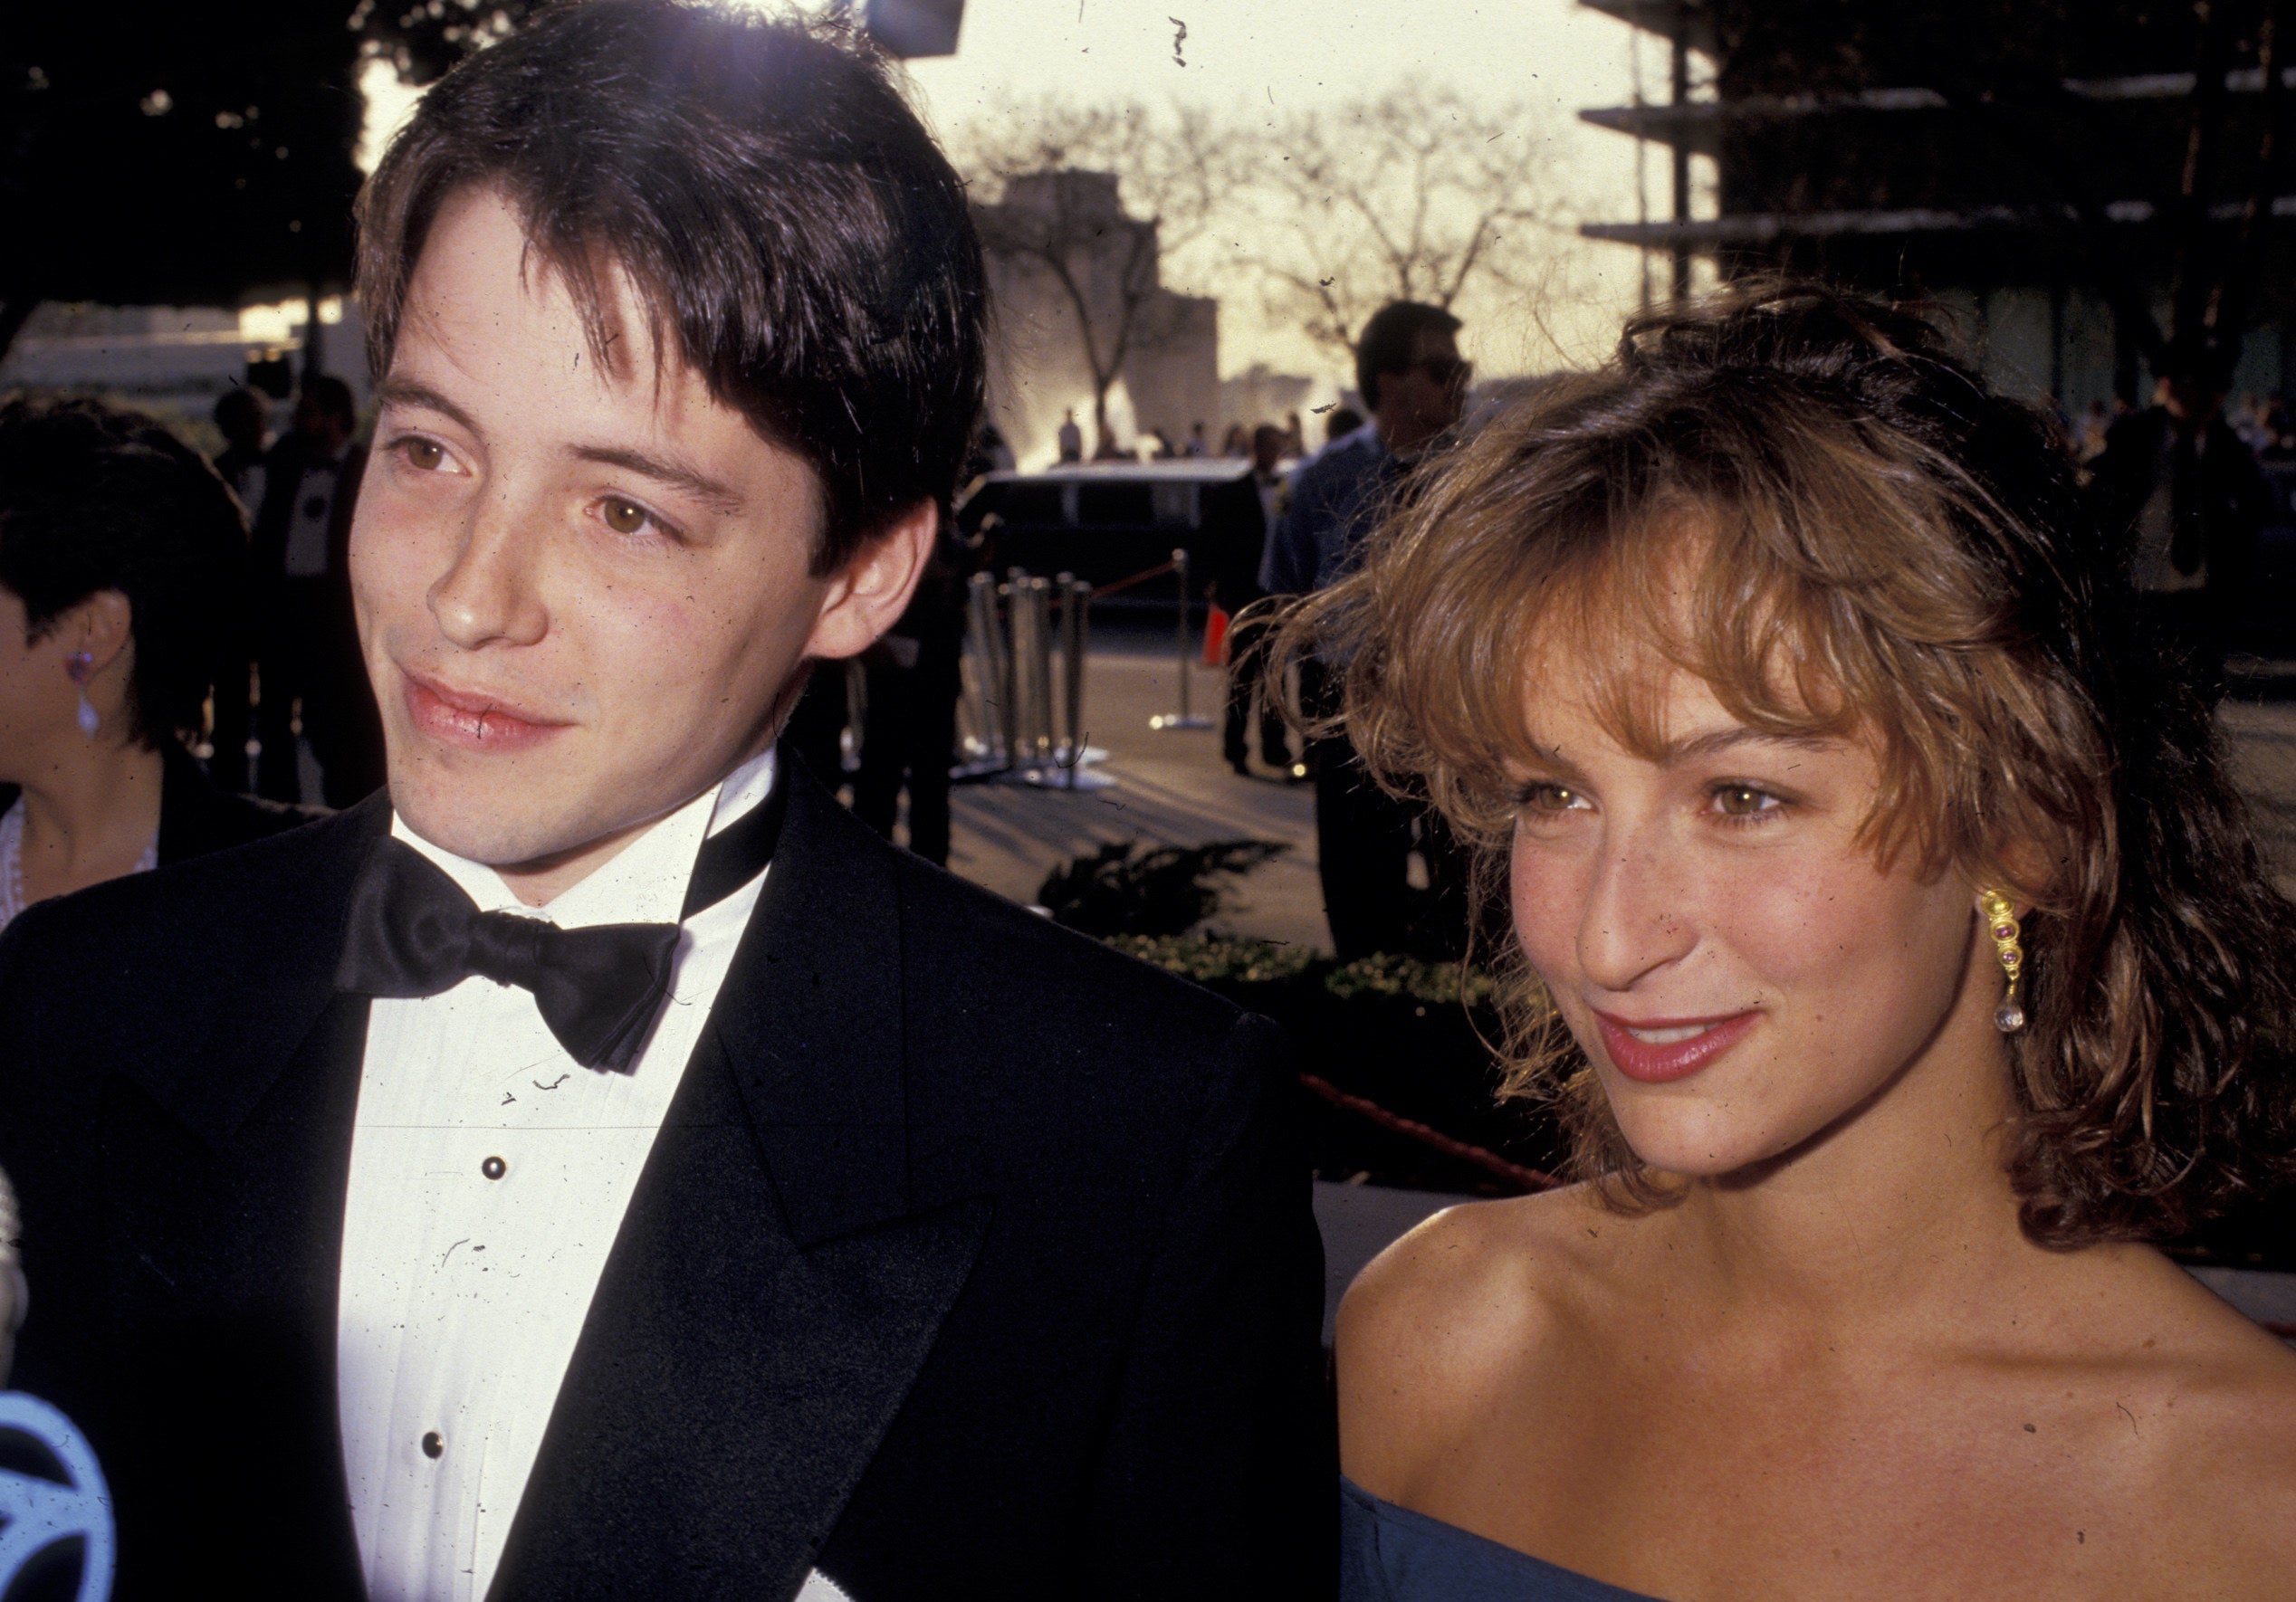 Matthew Broderick and Jennifer Grey on the red carpet